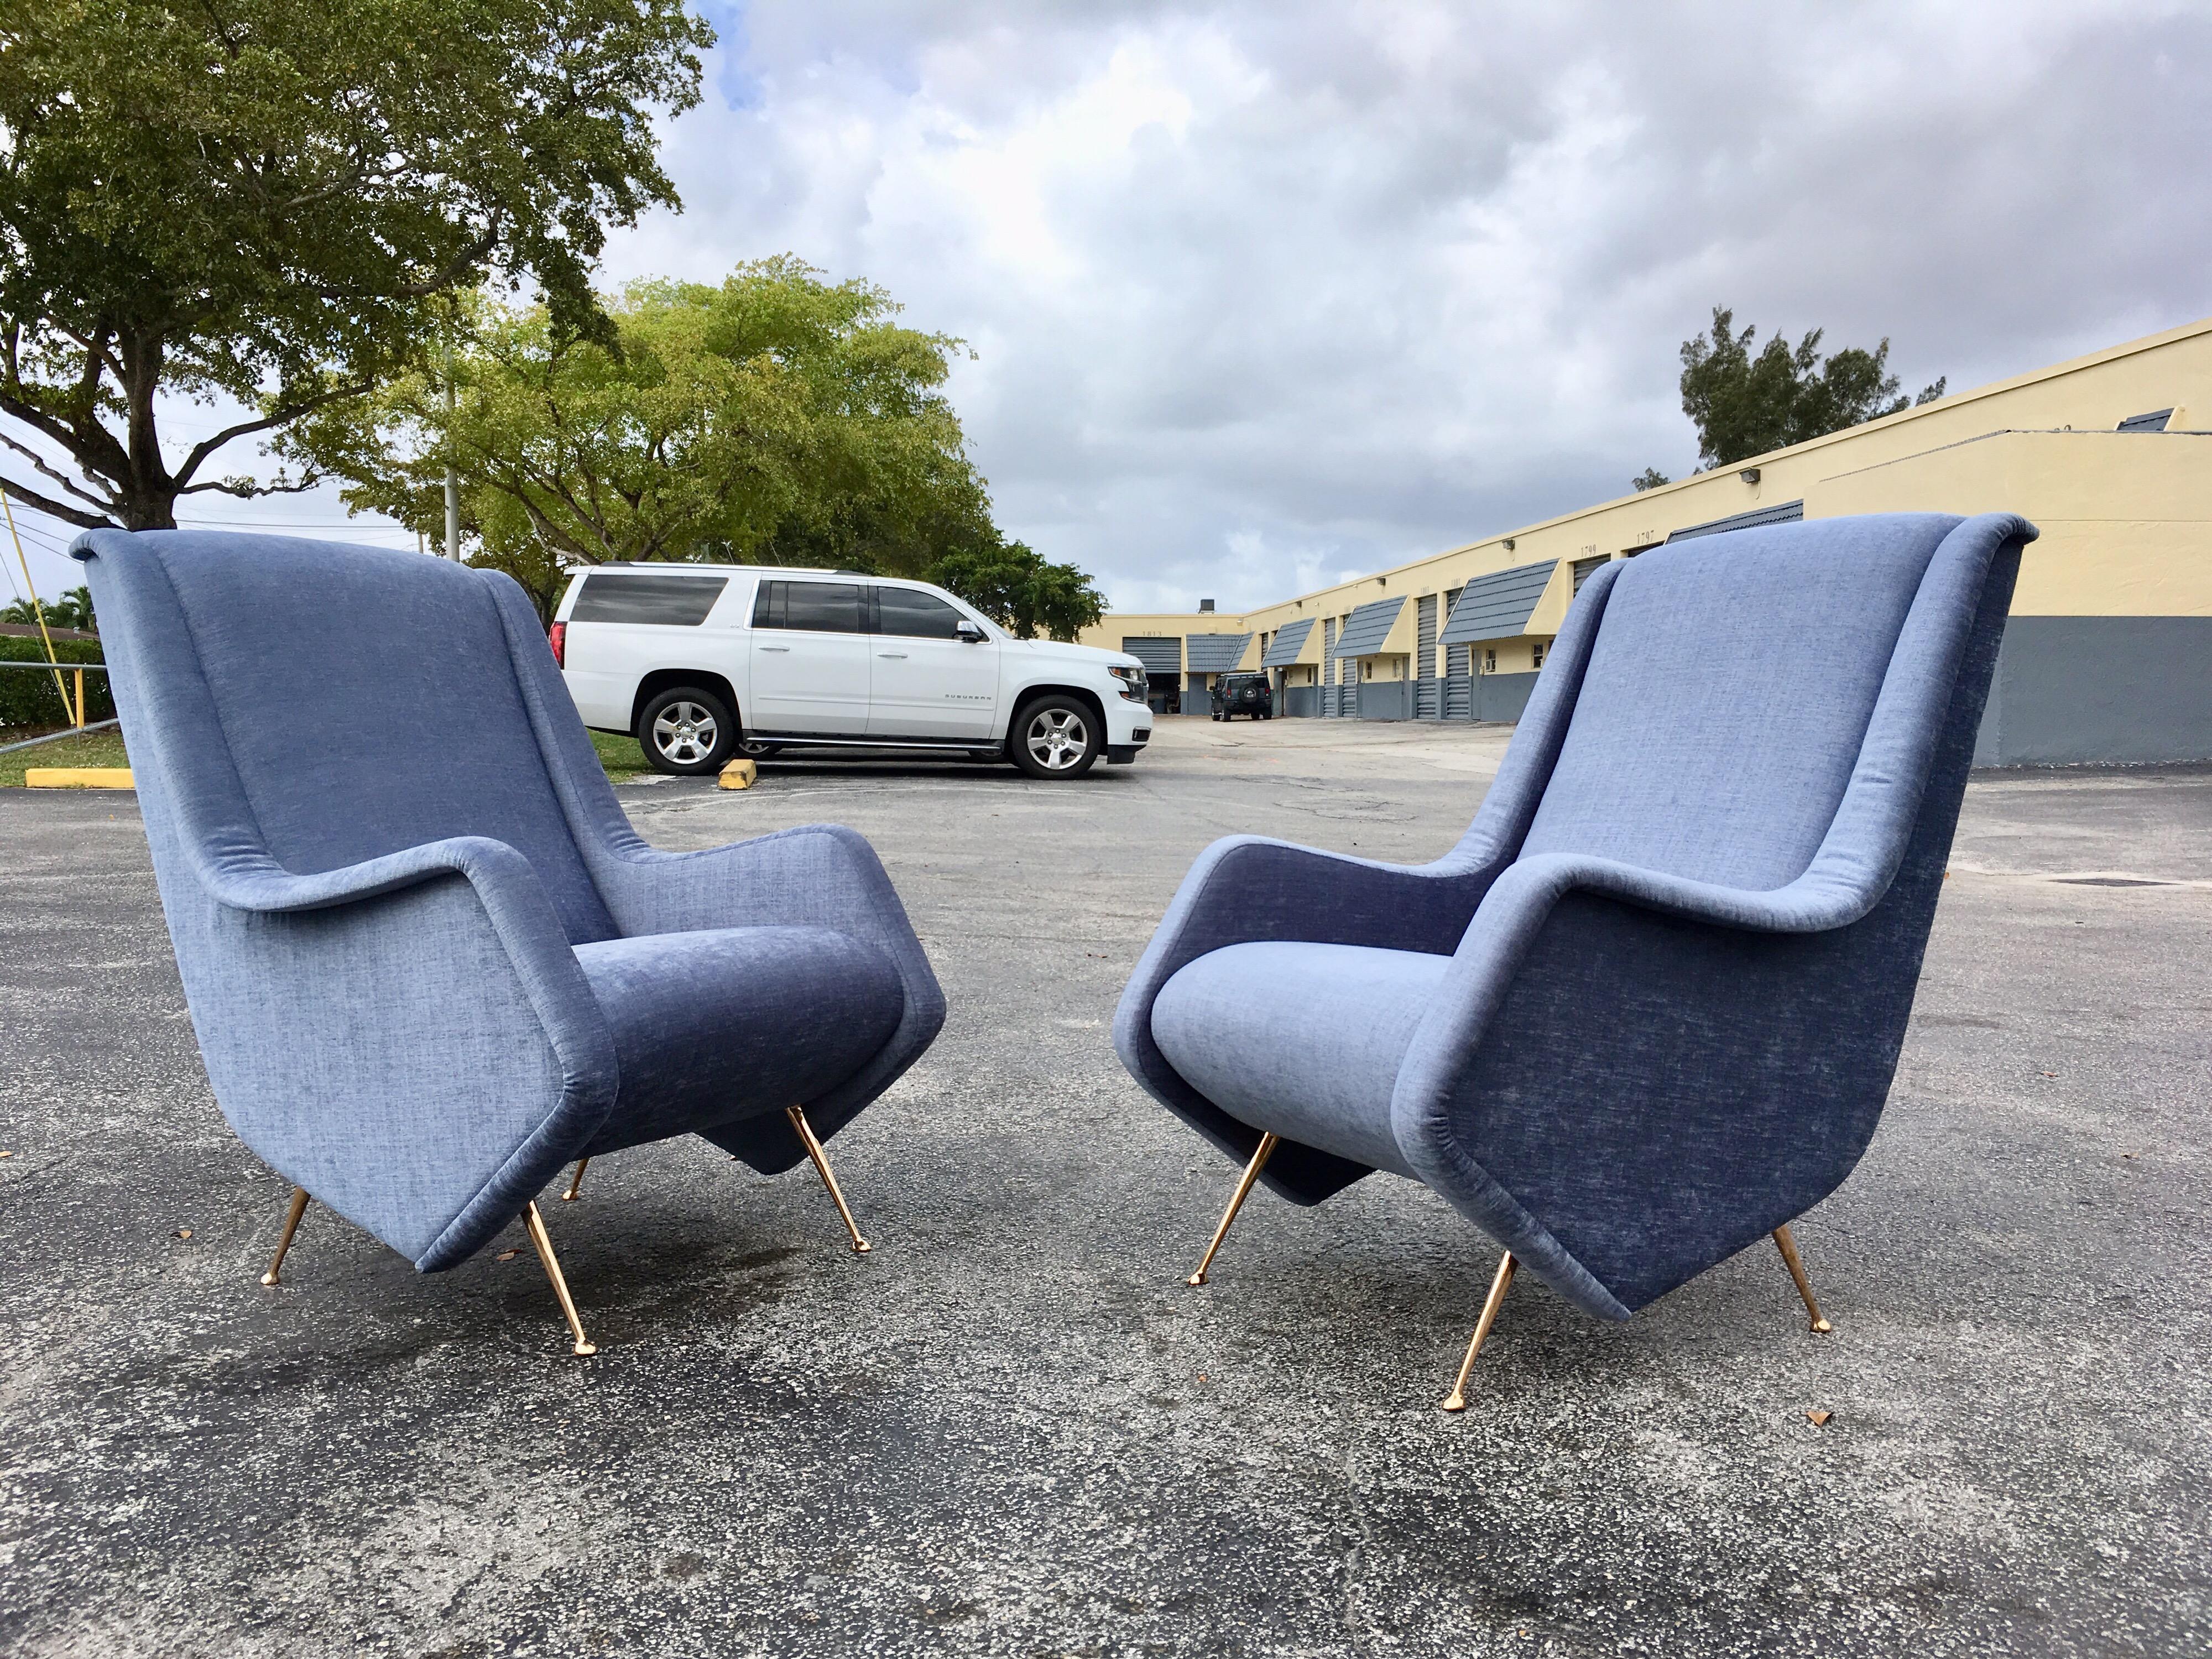 Beautiful lounge chairs in the style of Carlo de Carli or Gio Ponti.
The chairs have bronze legs and are covered in Knoll fabric.